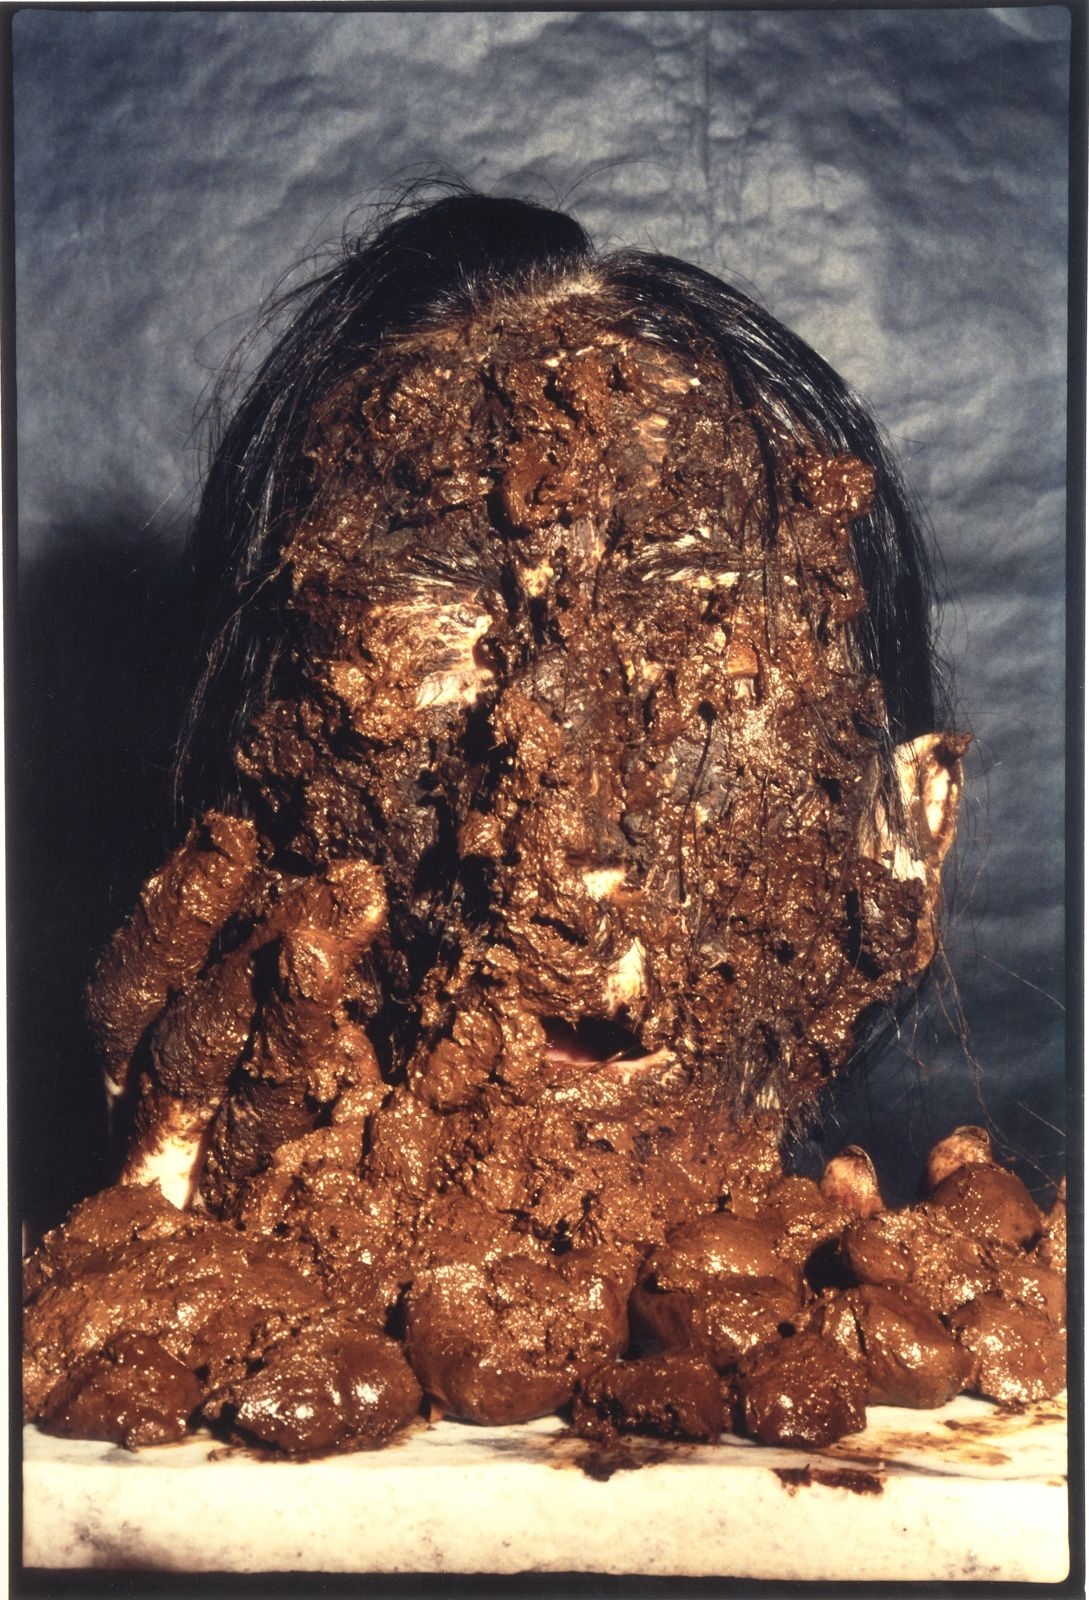 Face covered in excrement by David Nebreda, 1989-1990